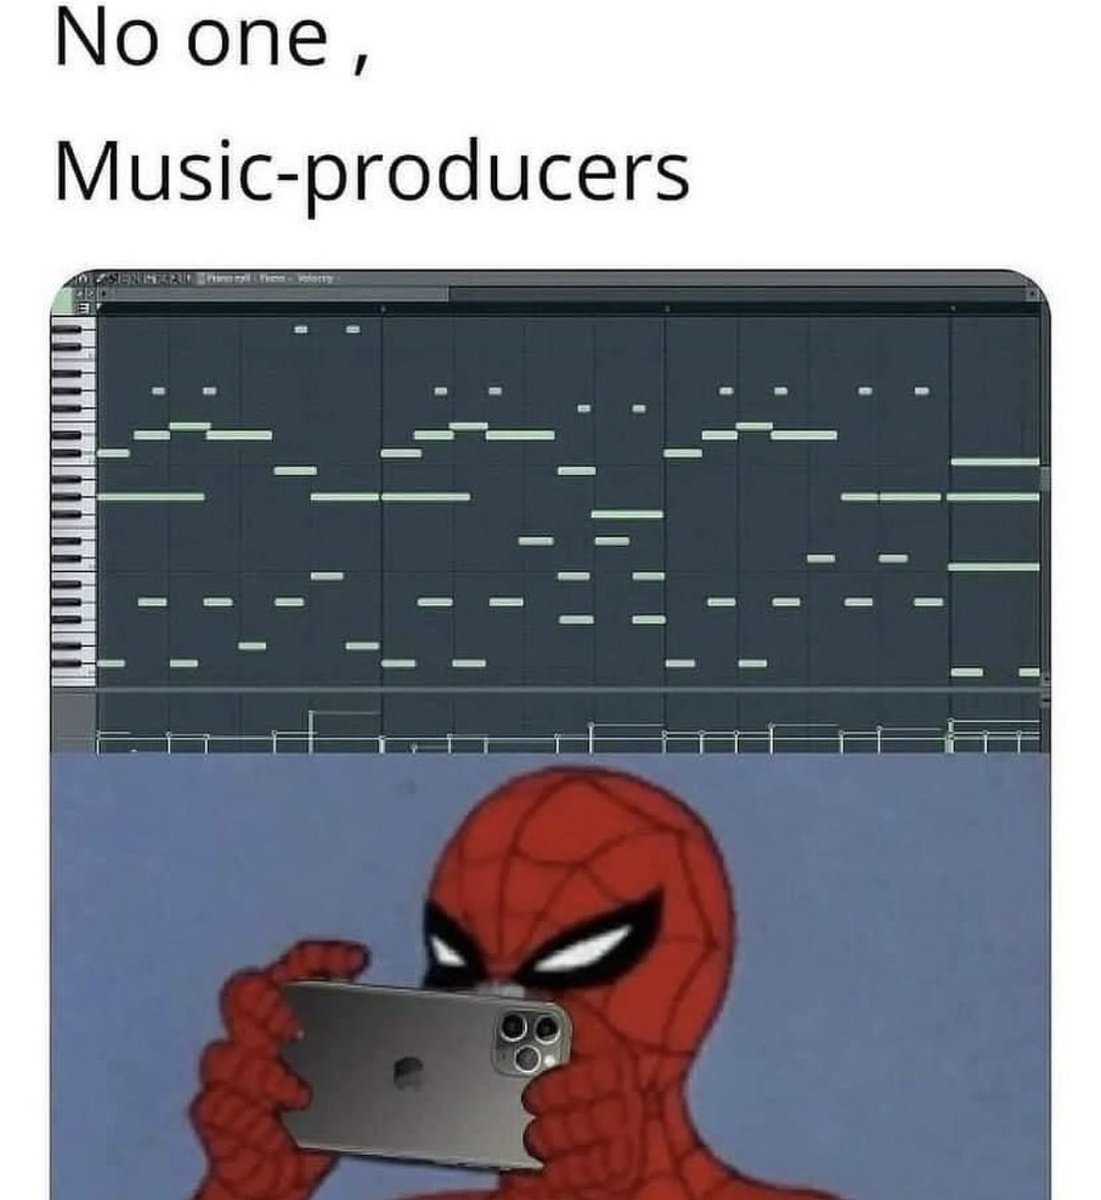 This you?

Want a free sample pack? Link in bio
Follow @Future_Samples  for more music production content!
Credit: @ prodverse on Instagram

#flstudio #producermemes #beatmakermemes #producerlife #abletonmemes #musicmemes #flstudio20 #flstudio #producerlifestyle #producermemes